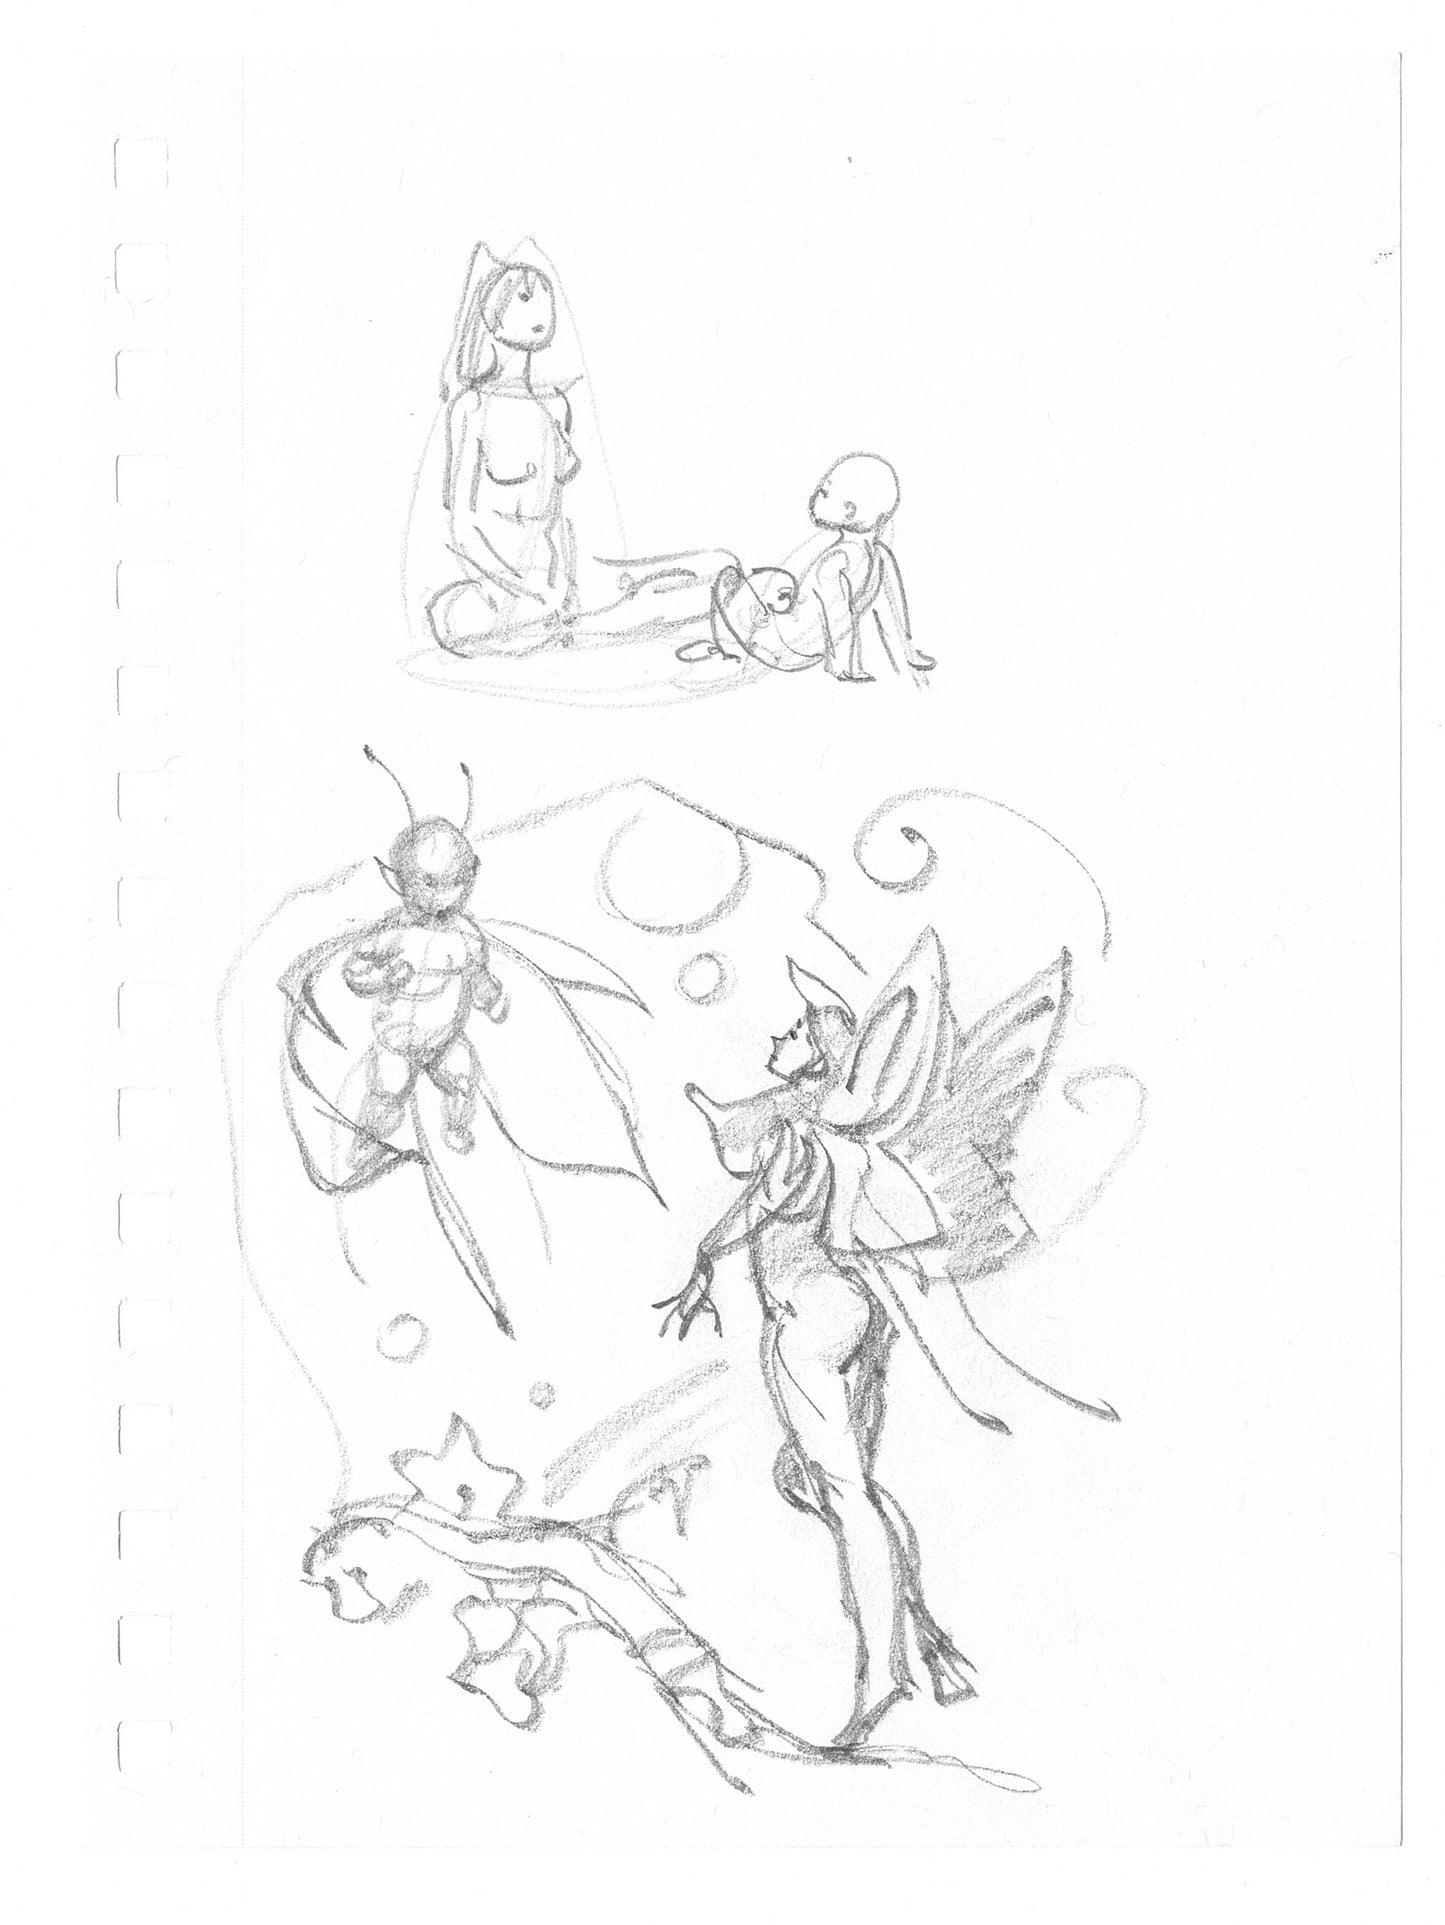 Mike Hoffman Comic Book Artist Personal Original Pencil Art Notebook Page From 2013 B-m36